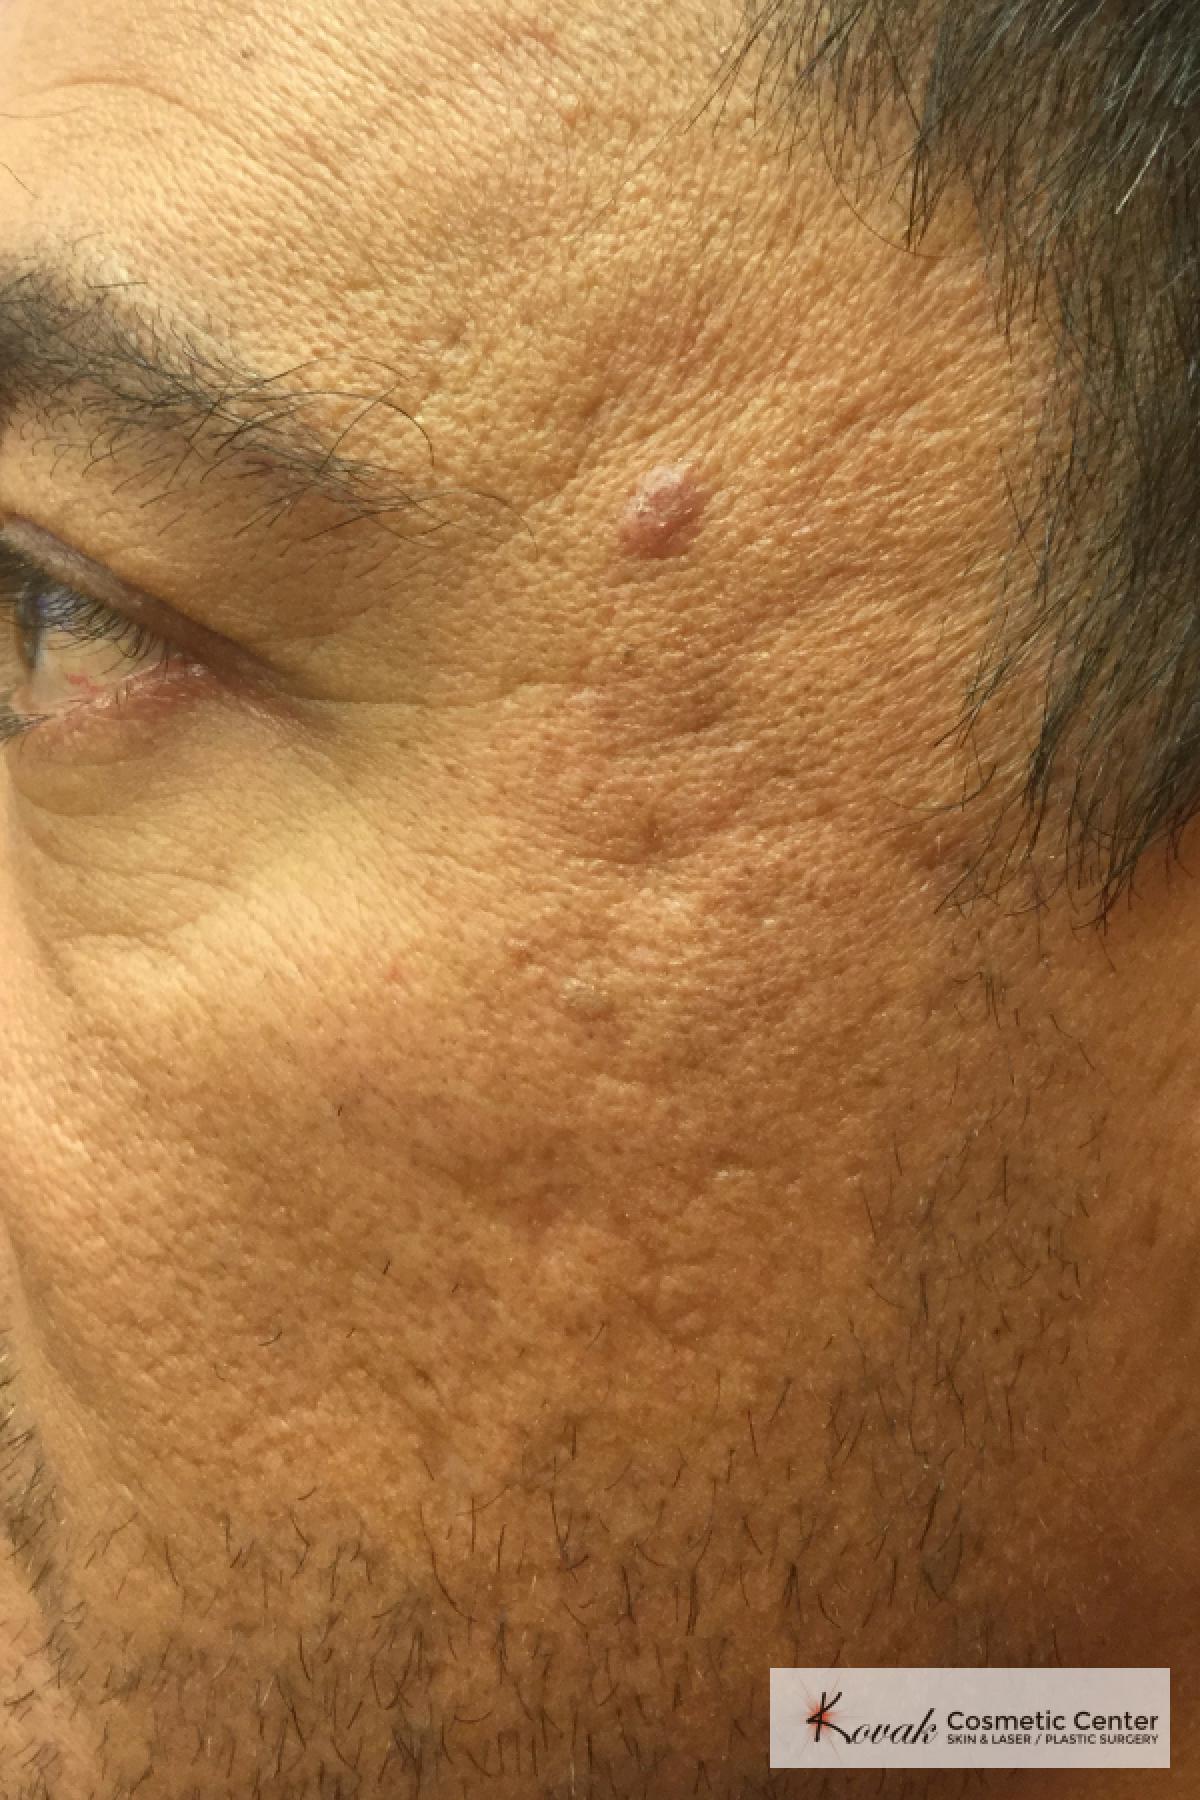 Acne Scars treated with Juvederm on 47 year old male - Before 